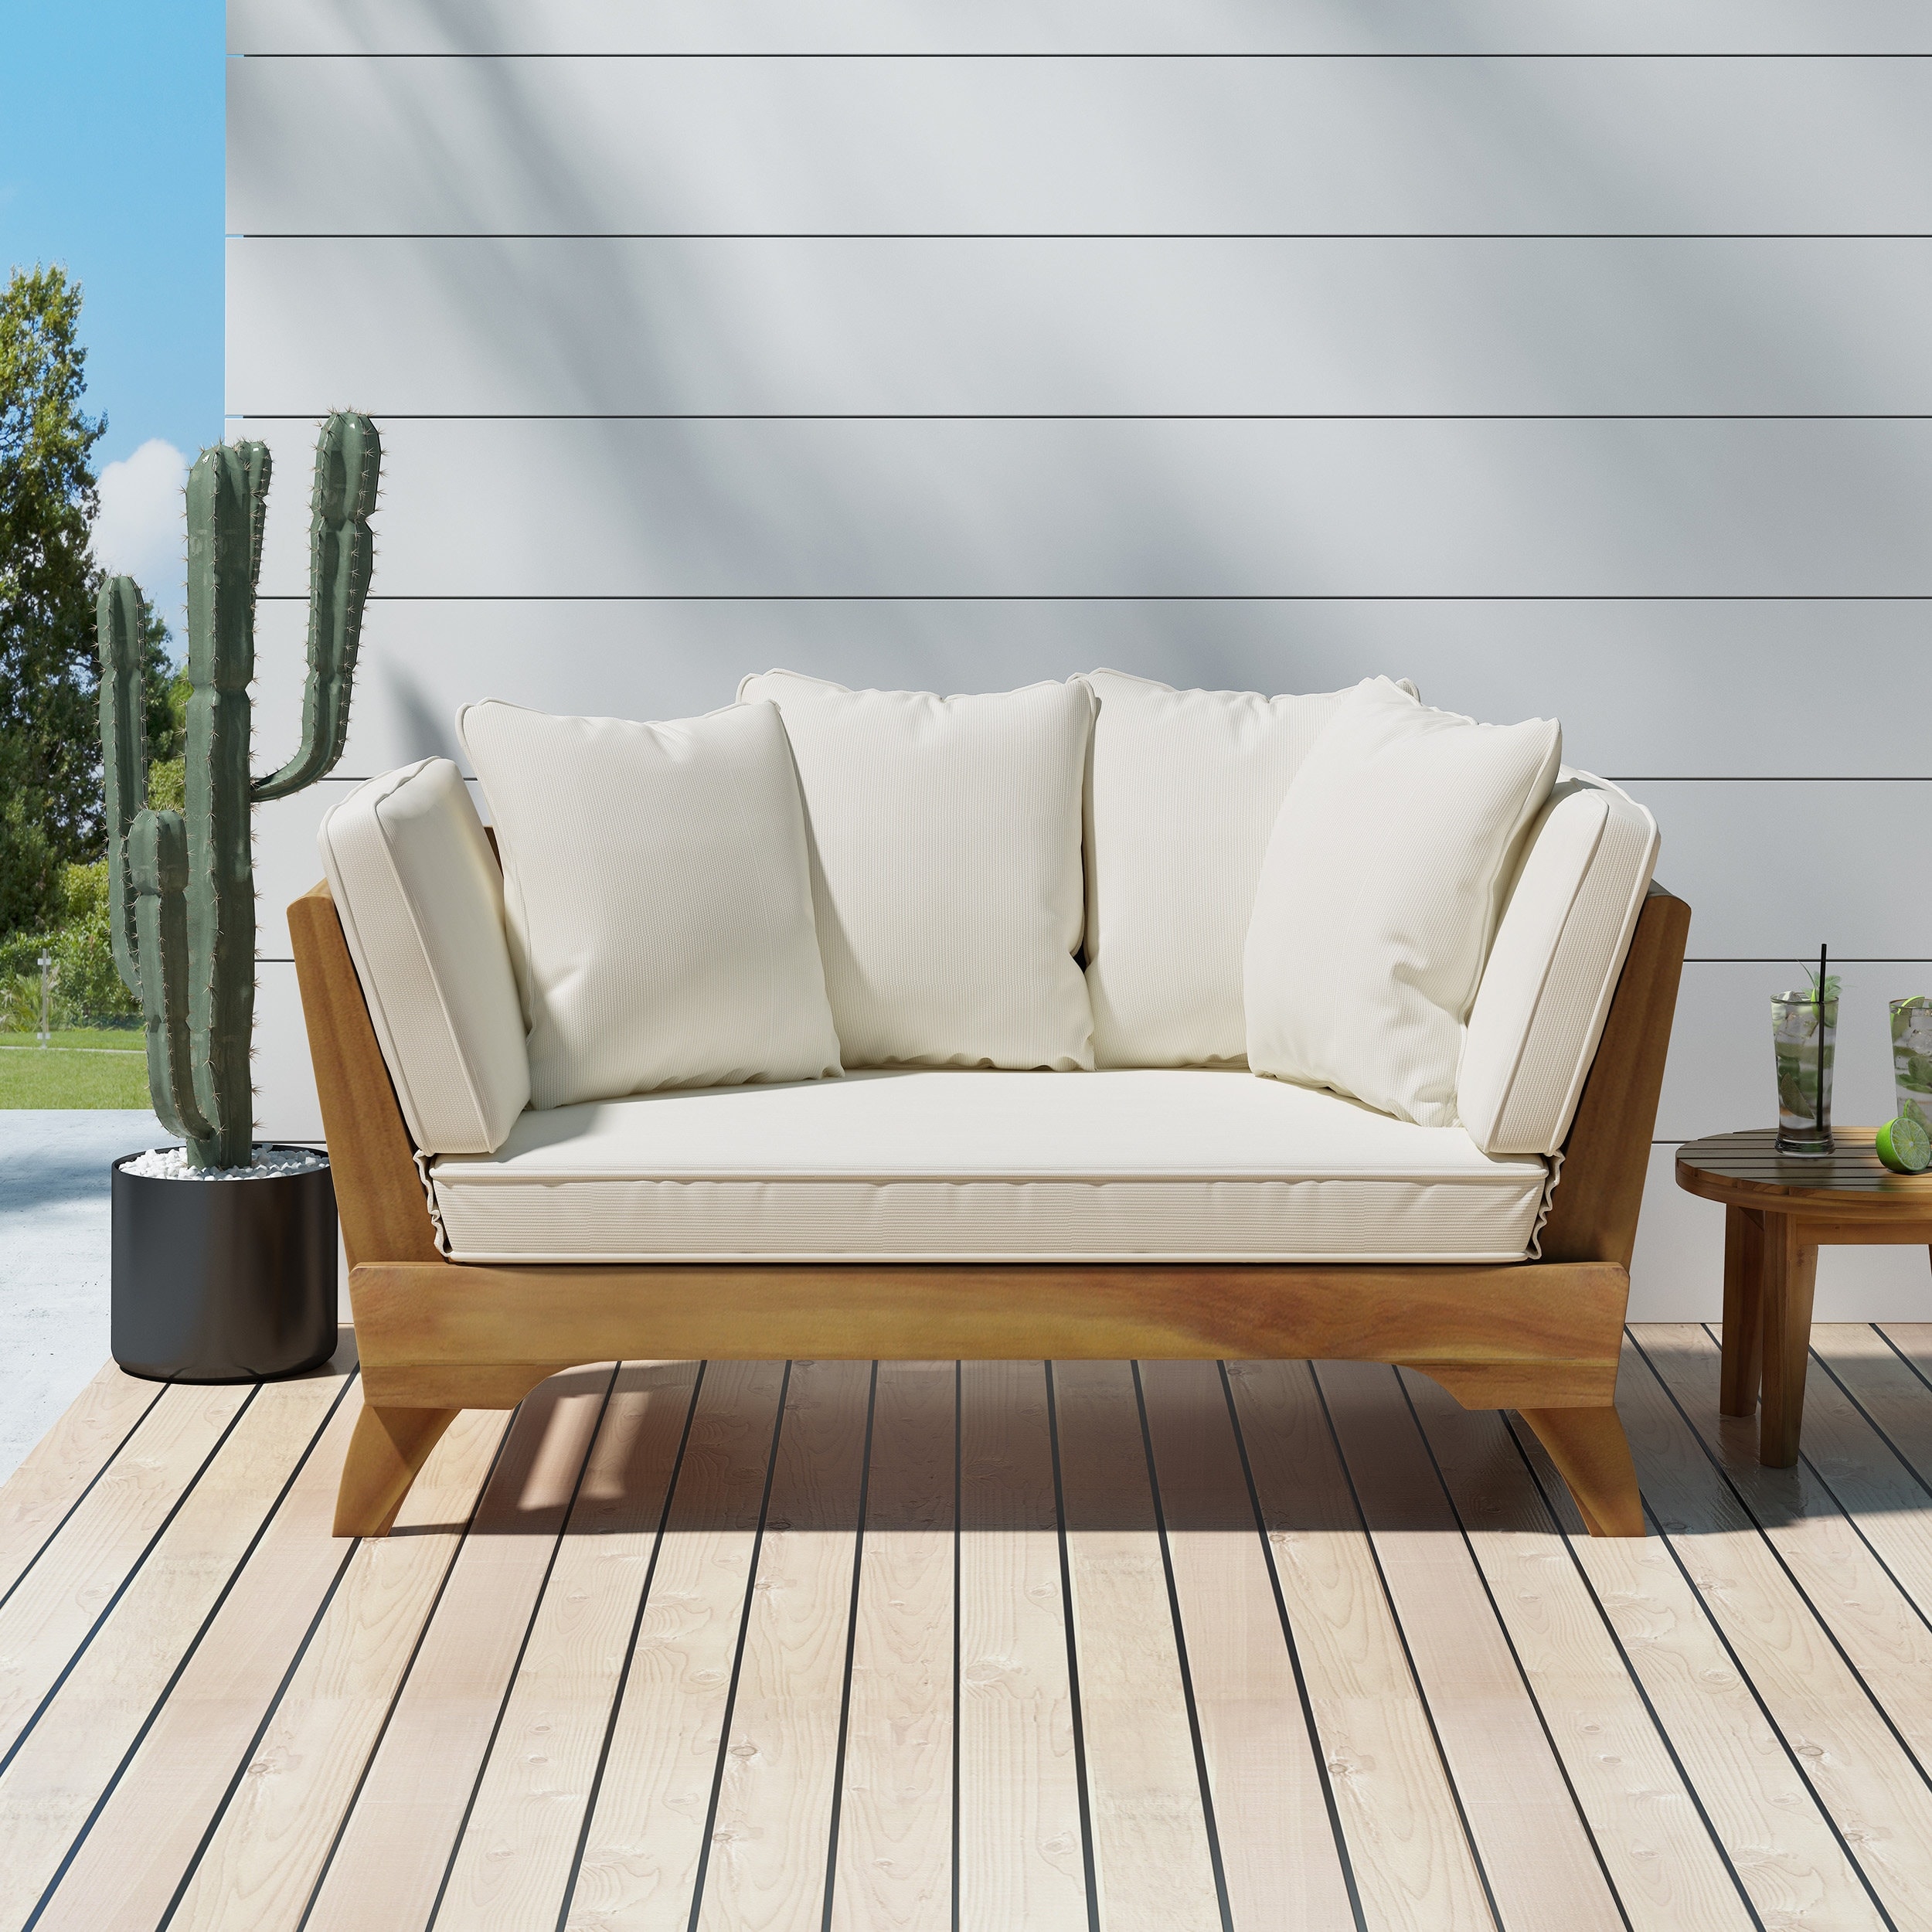 https://ak1.ostkcdn.com/images/products/is/images/direct/8d282f95c4bb6584380d2b3abab8a6ec32eaa489/Serene-Outdoor-Acacia-Wood-Expandable-Daybed-with-Water-Resistant-Cushions-by-Christopher-Knight-Home.jpg